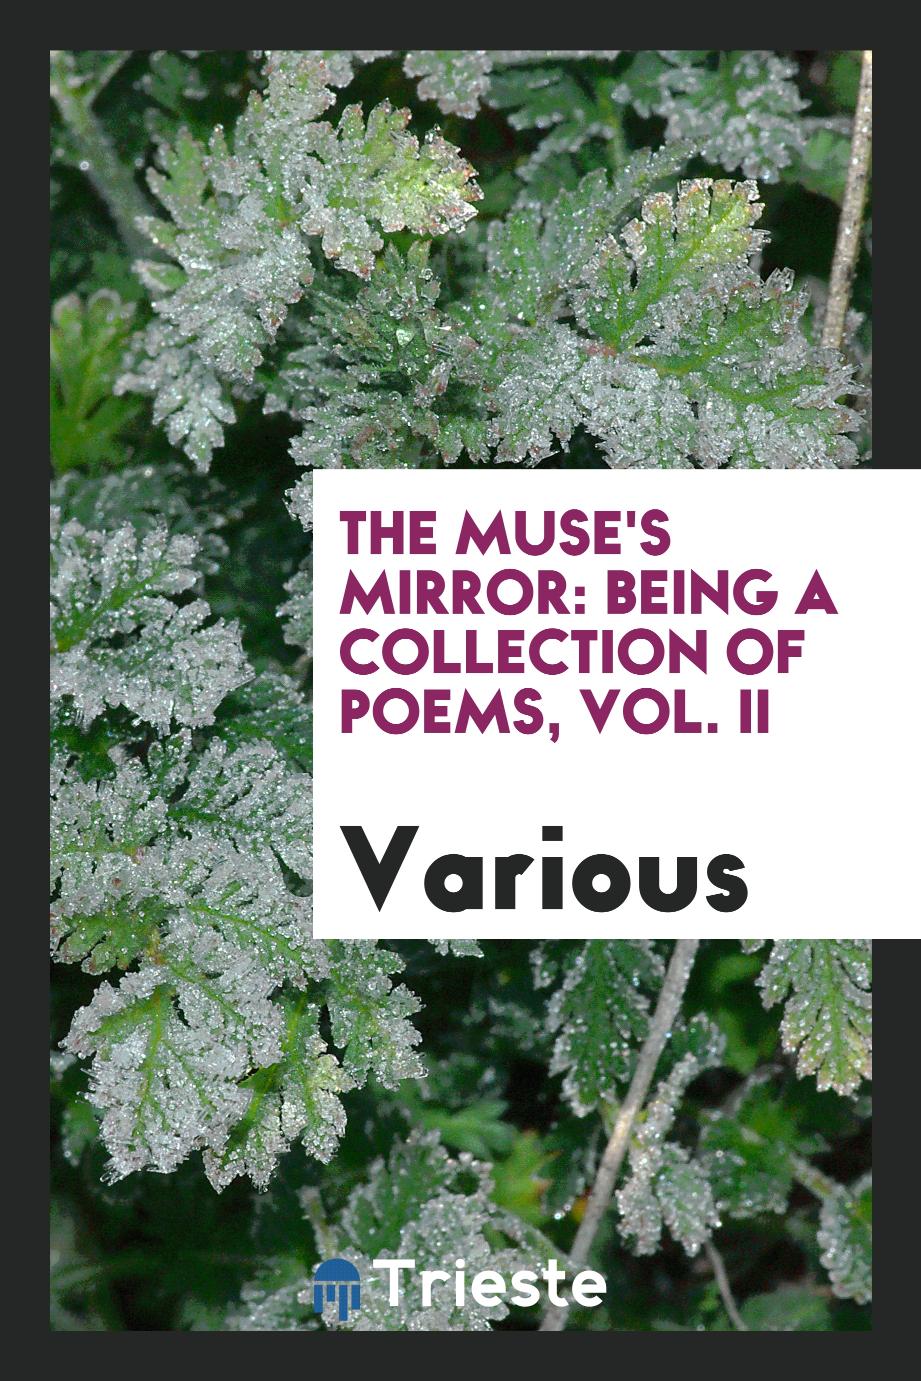 The Muse's Mirror: Being a Collection of Poems, Vol. II